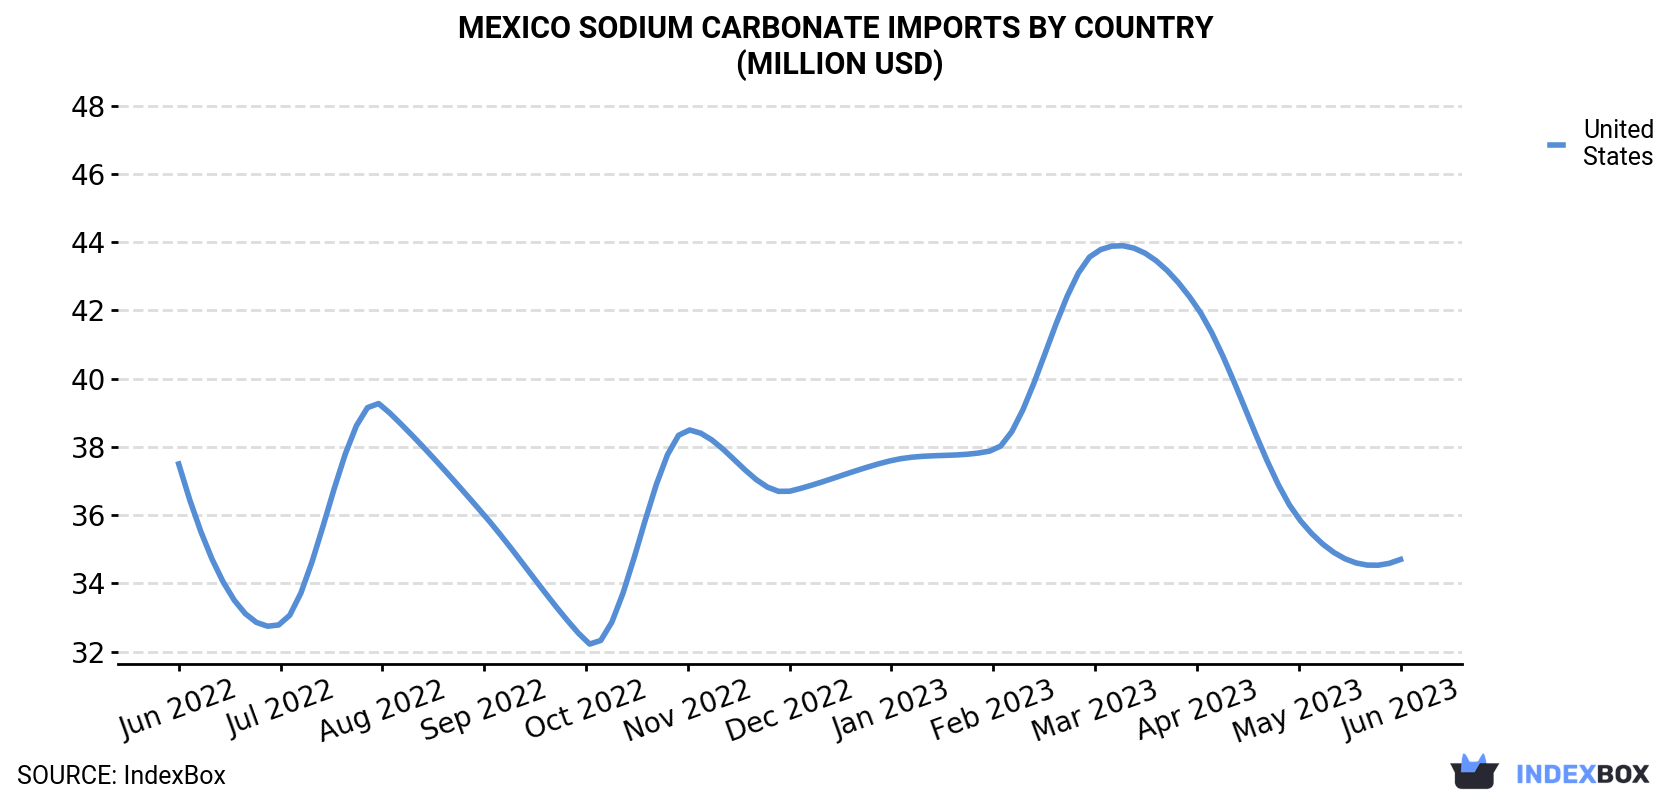 Mexico Sodium Carbonate Imports By Country (Million USD)